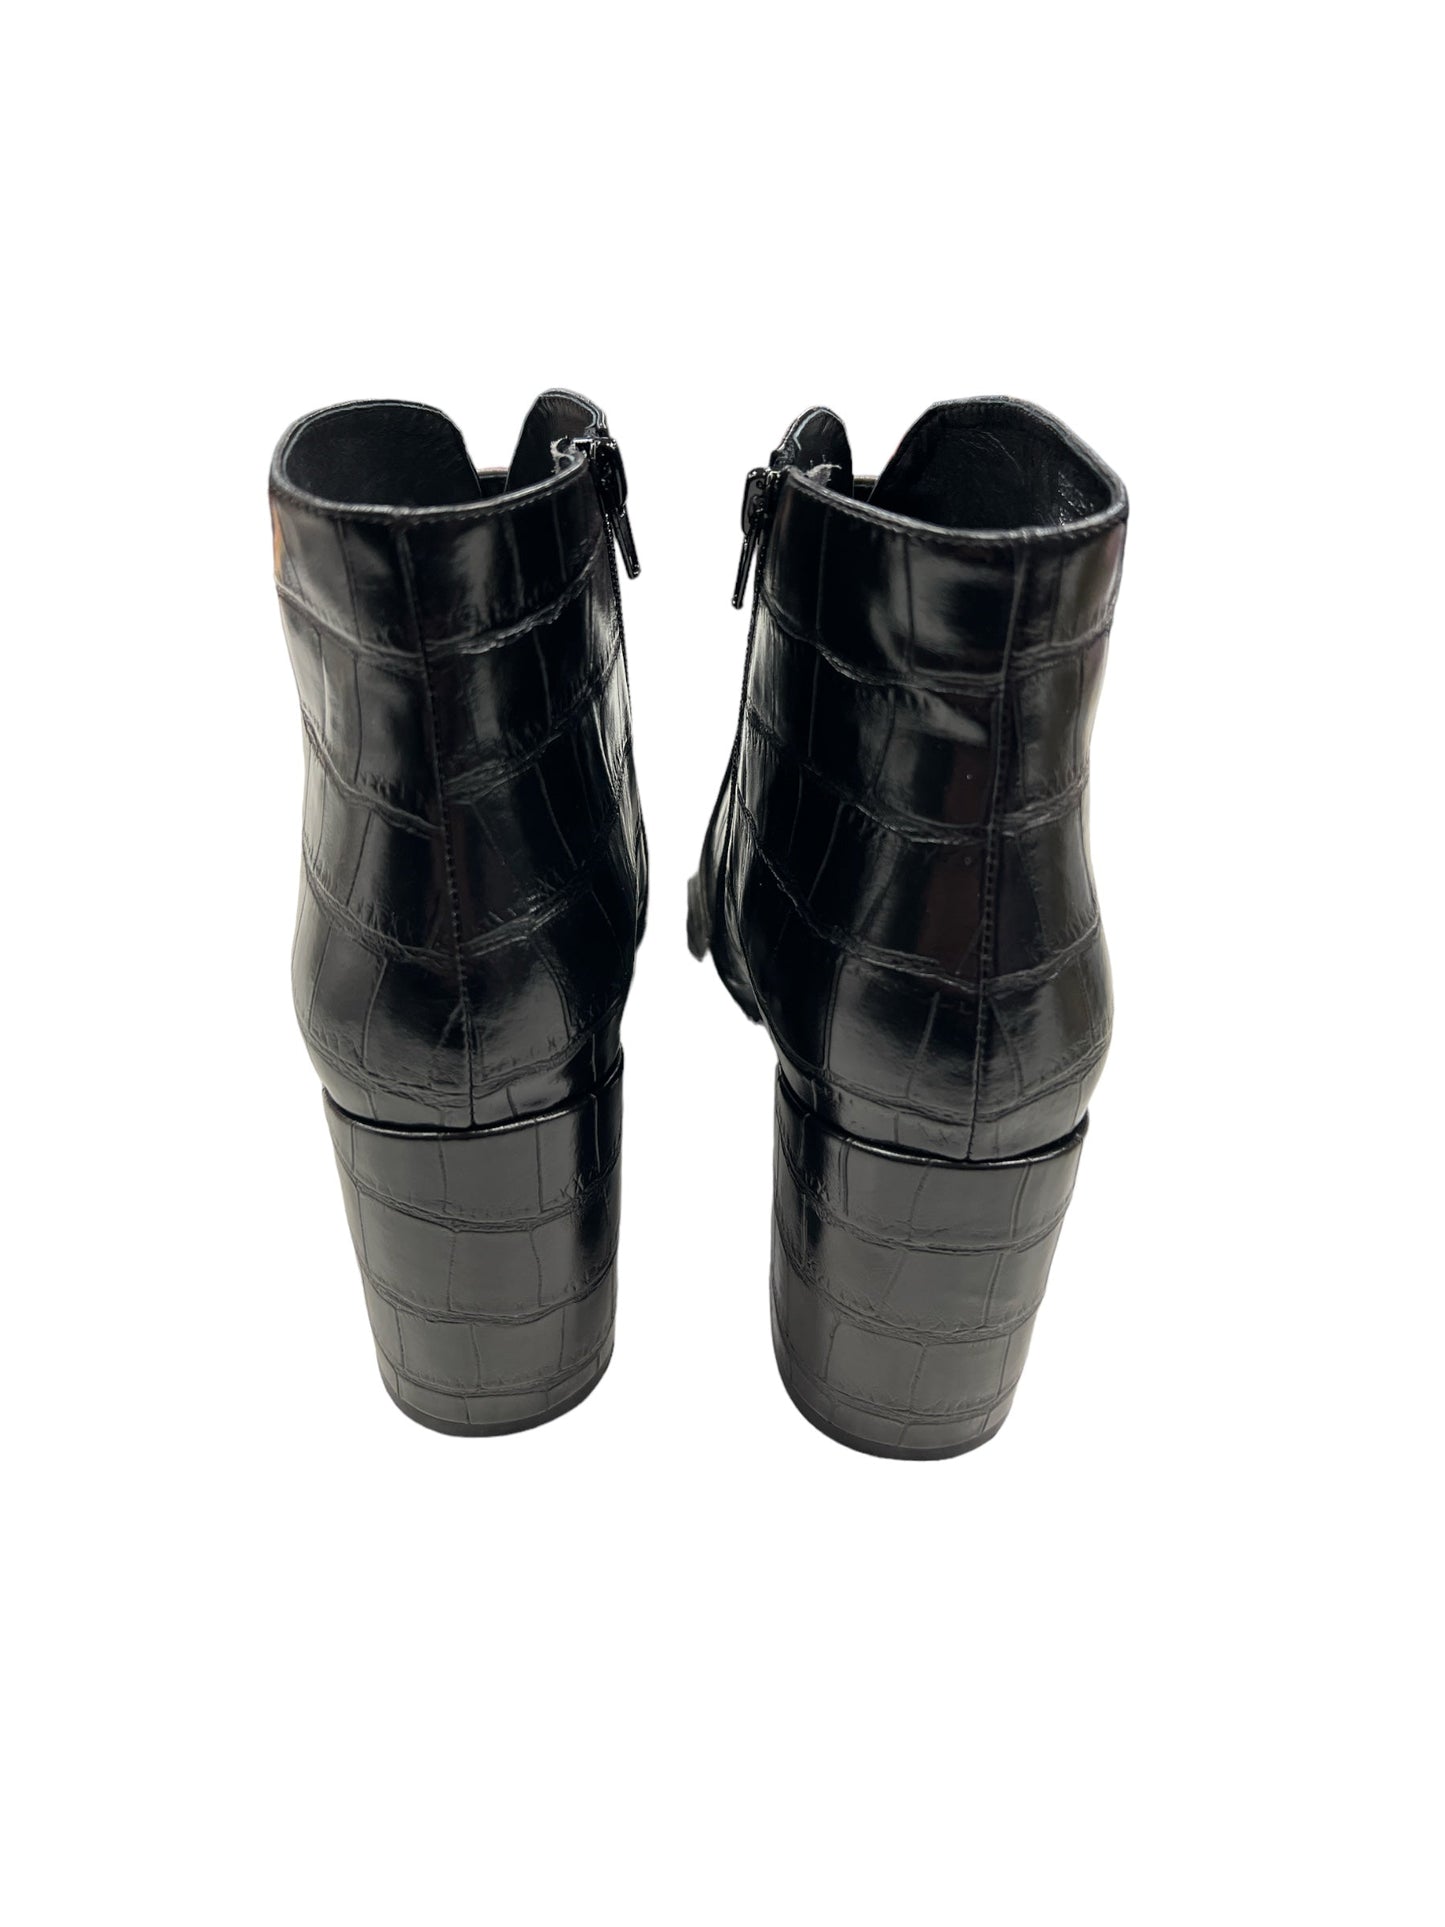 Boots Leather By Jeffery Campbell  Size: 10